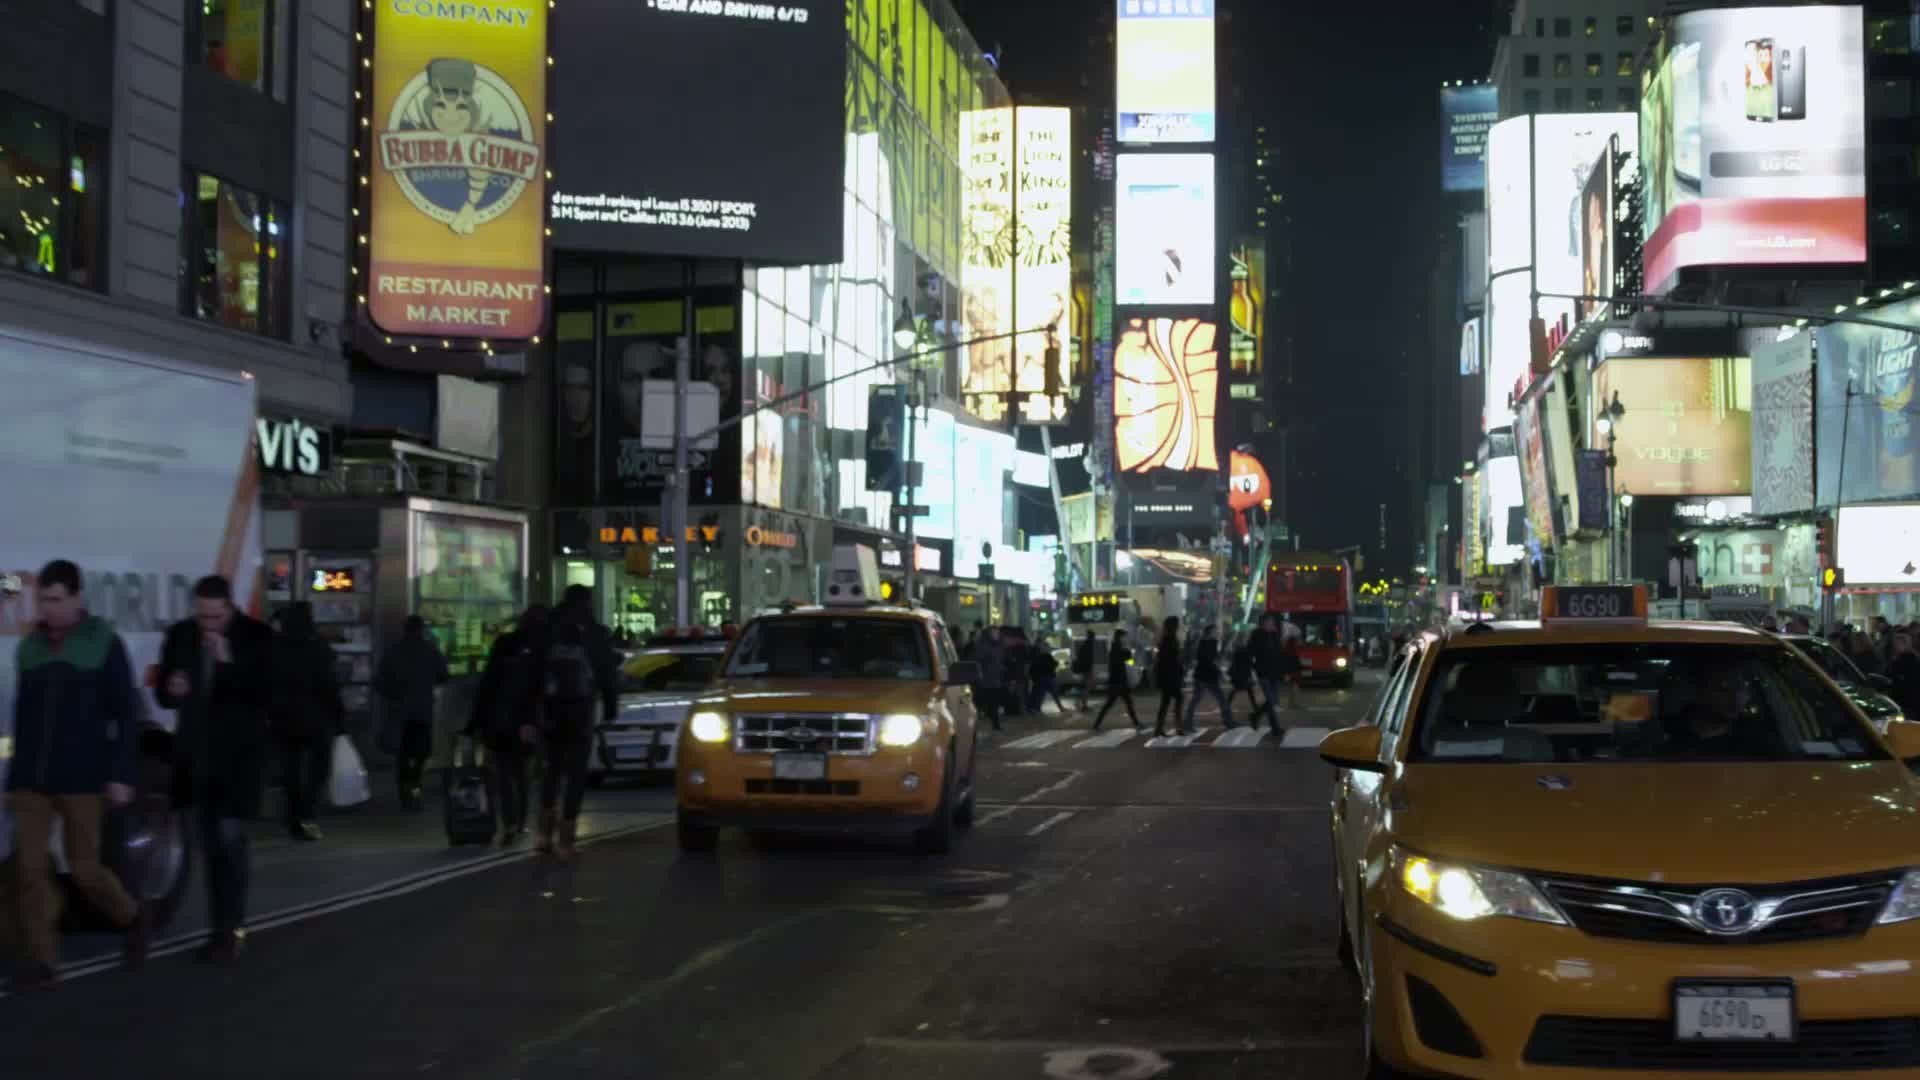 Times Square taxicab driving in slow motion at night in NYC